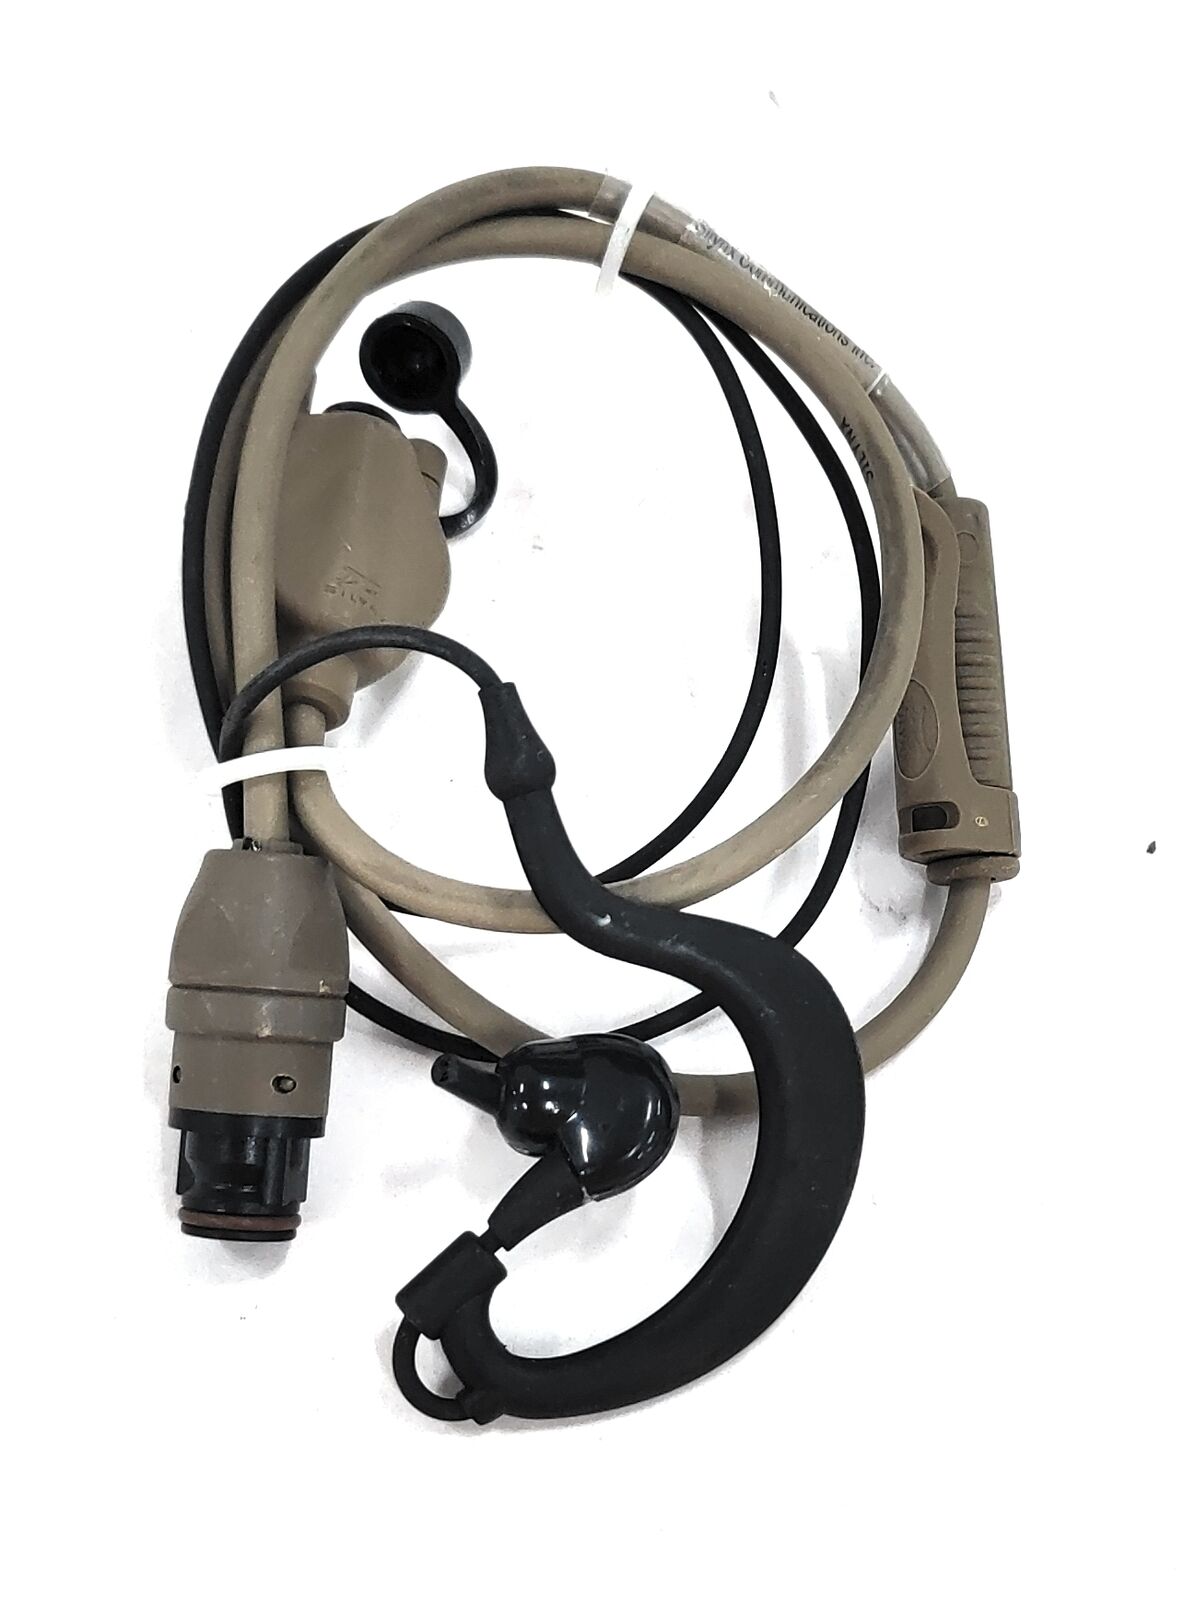 Silynx Clarus Single Headset Quick Disconnect Connector, Tan HS0013-DT